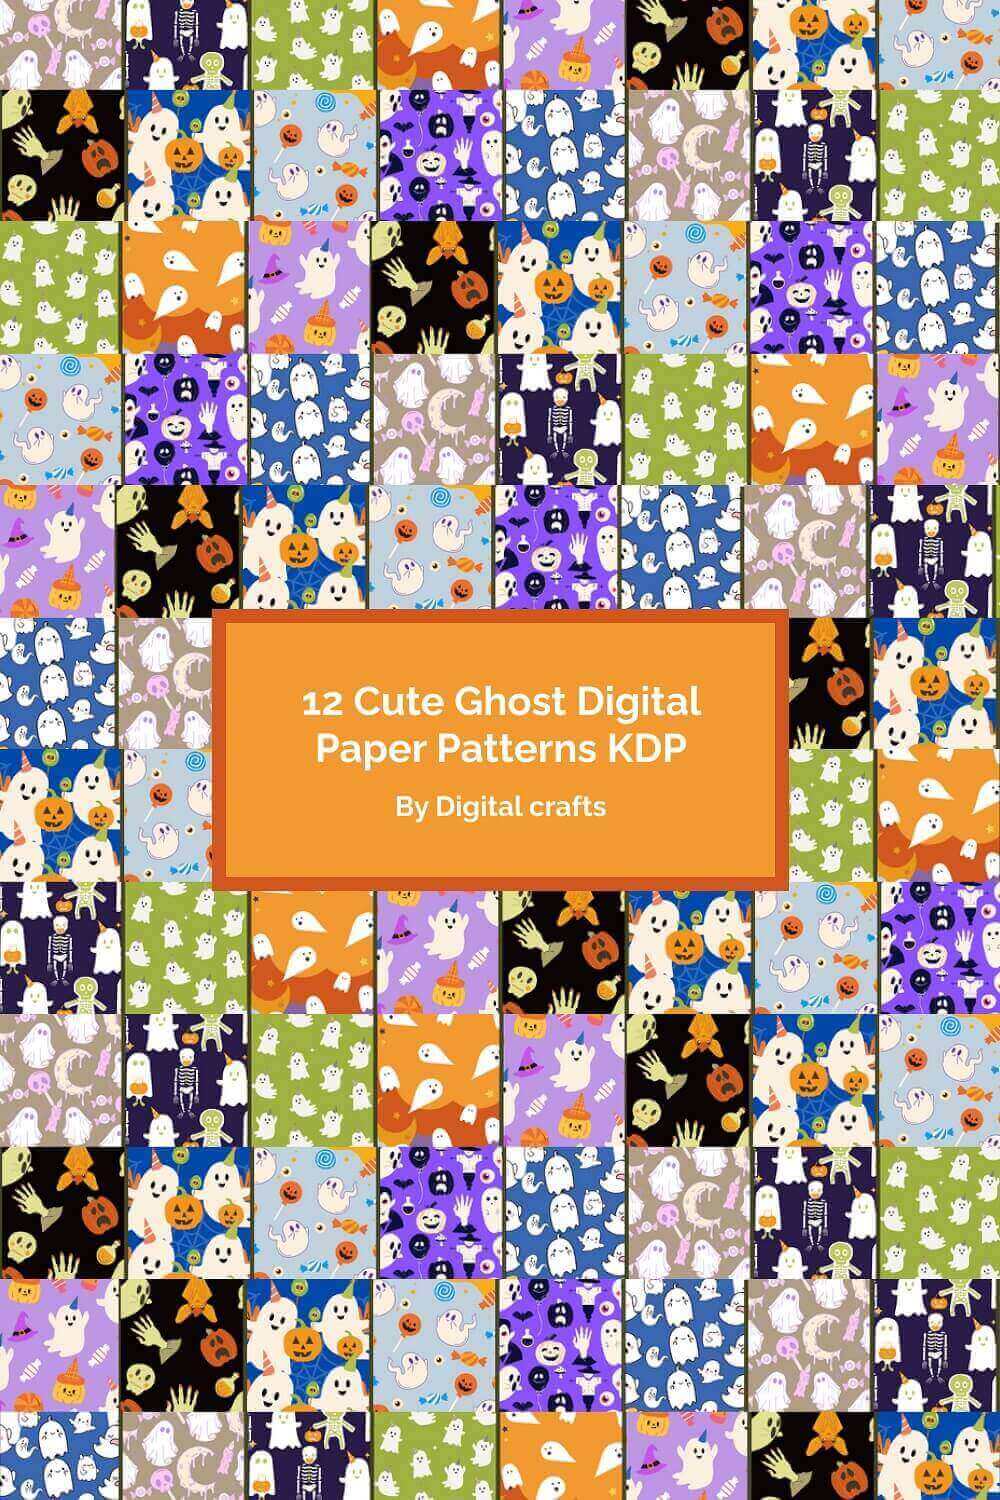 Examples of patterns with the image of ghosts and pumpkins.